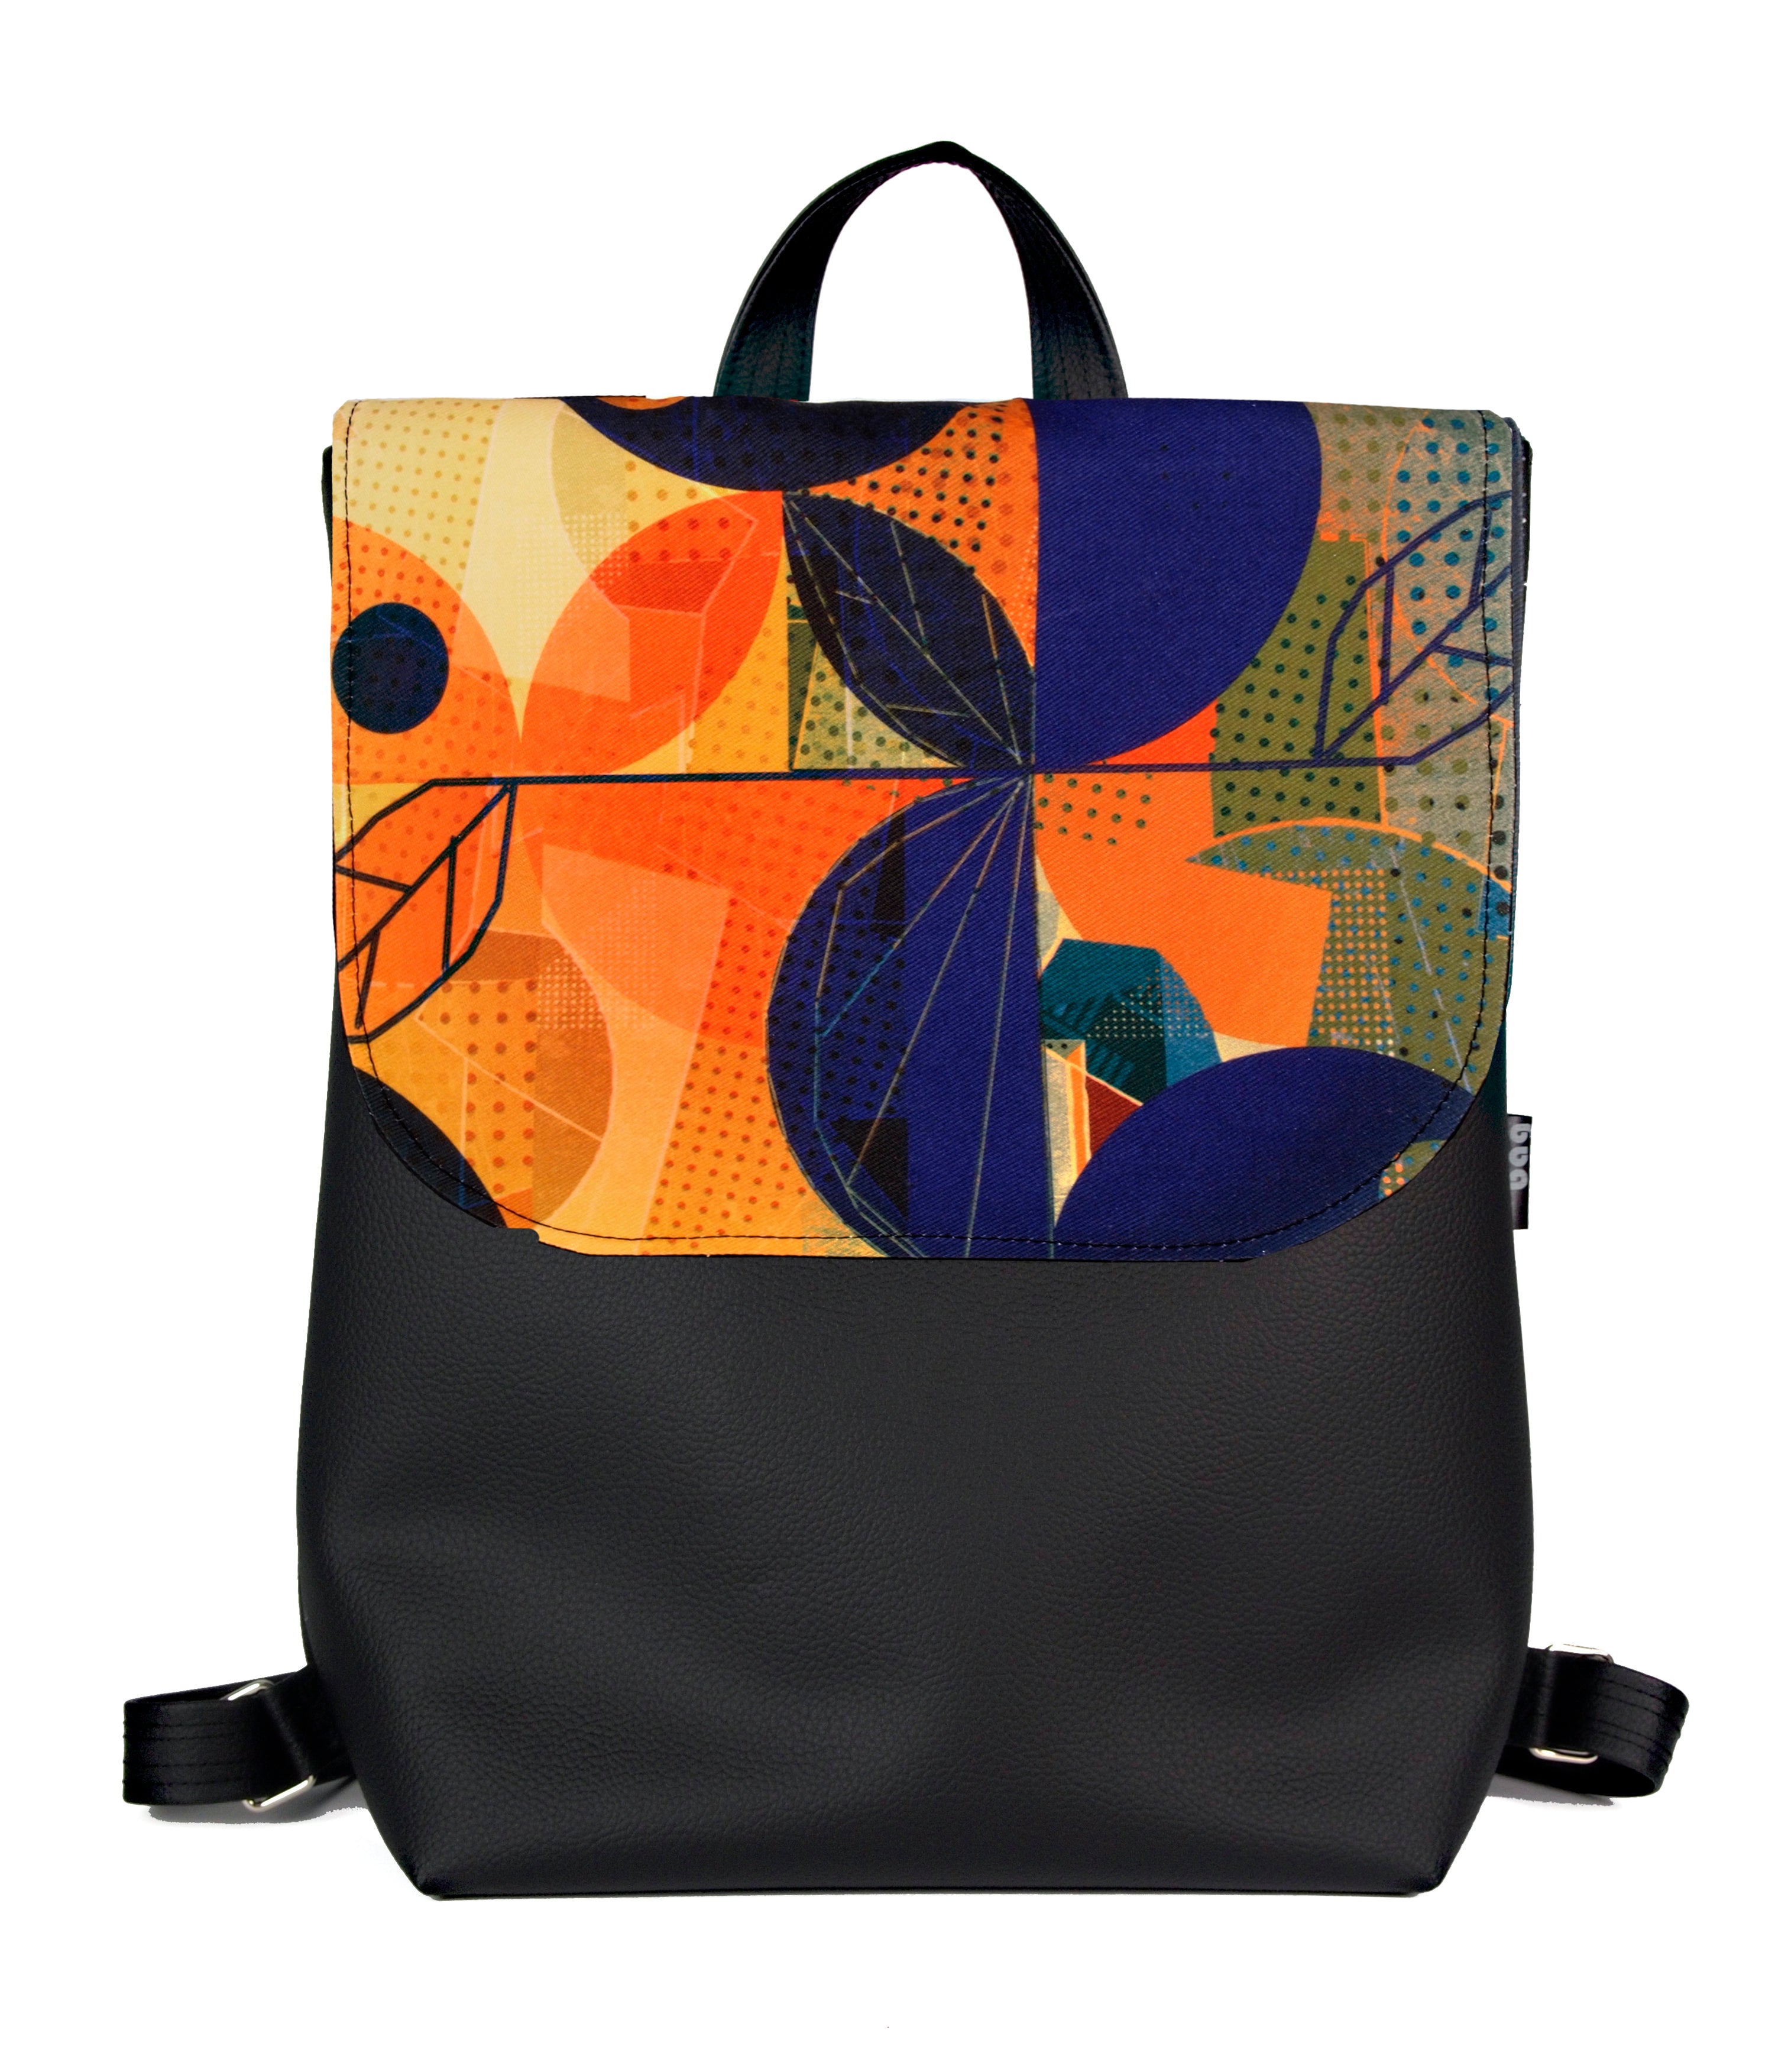 Bardo backpack large - Apple tree - Premium backpack large from BARDO ART WORKS - Just lvabstract, apple tree, dark blue, flowers, forest, gift, handemade, nature, painted patterns, red, tablet, urban style, vegan leather, woman89.00! Shop now at BARDO ART WORKS